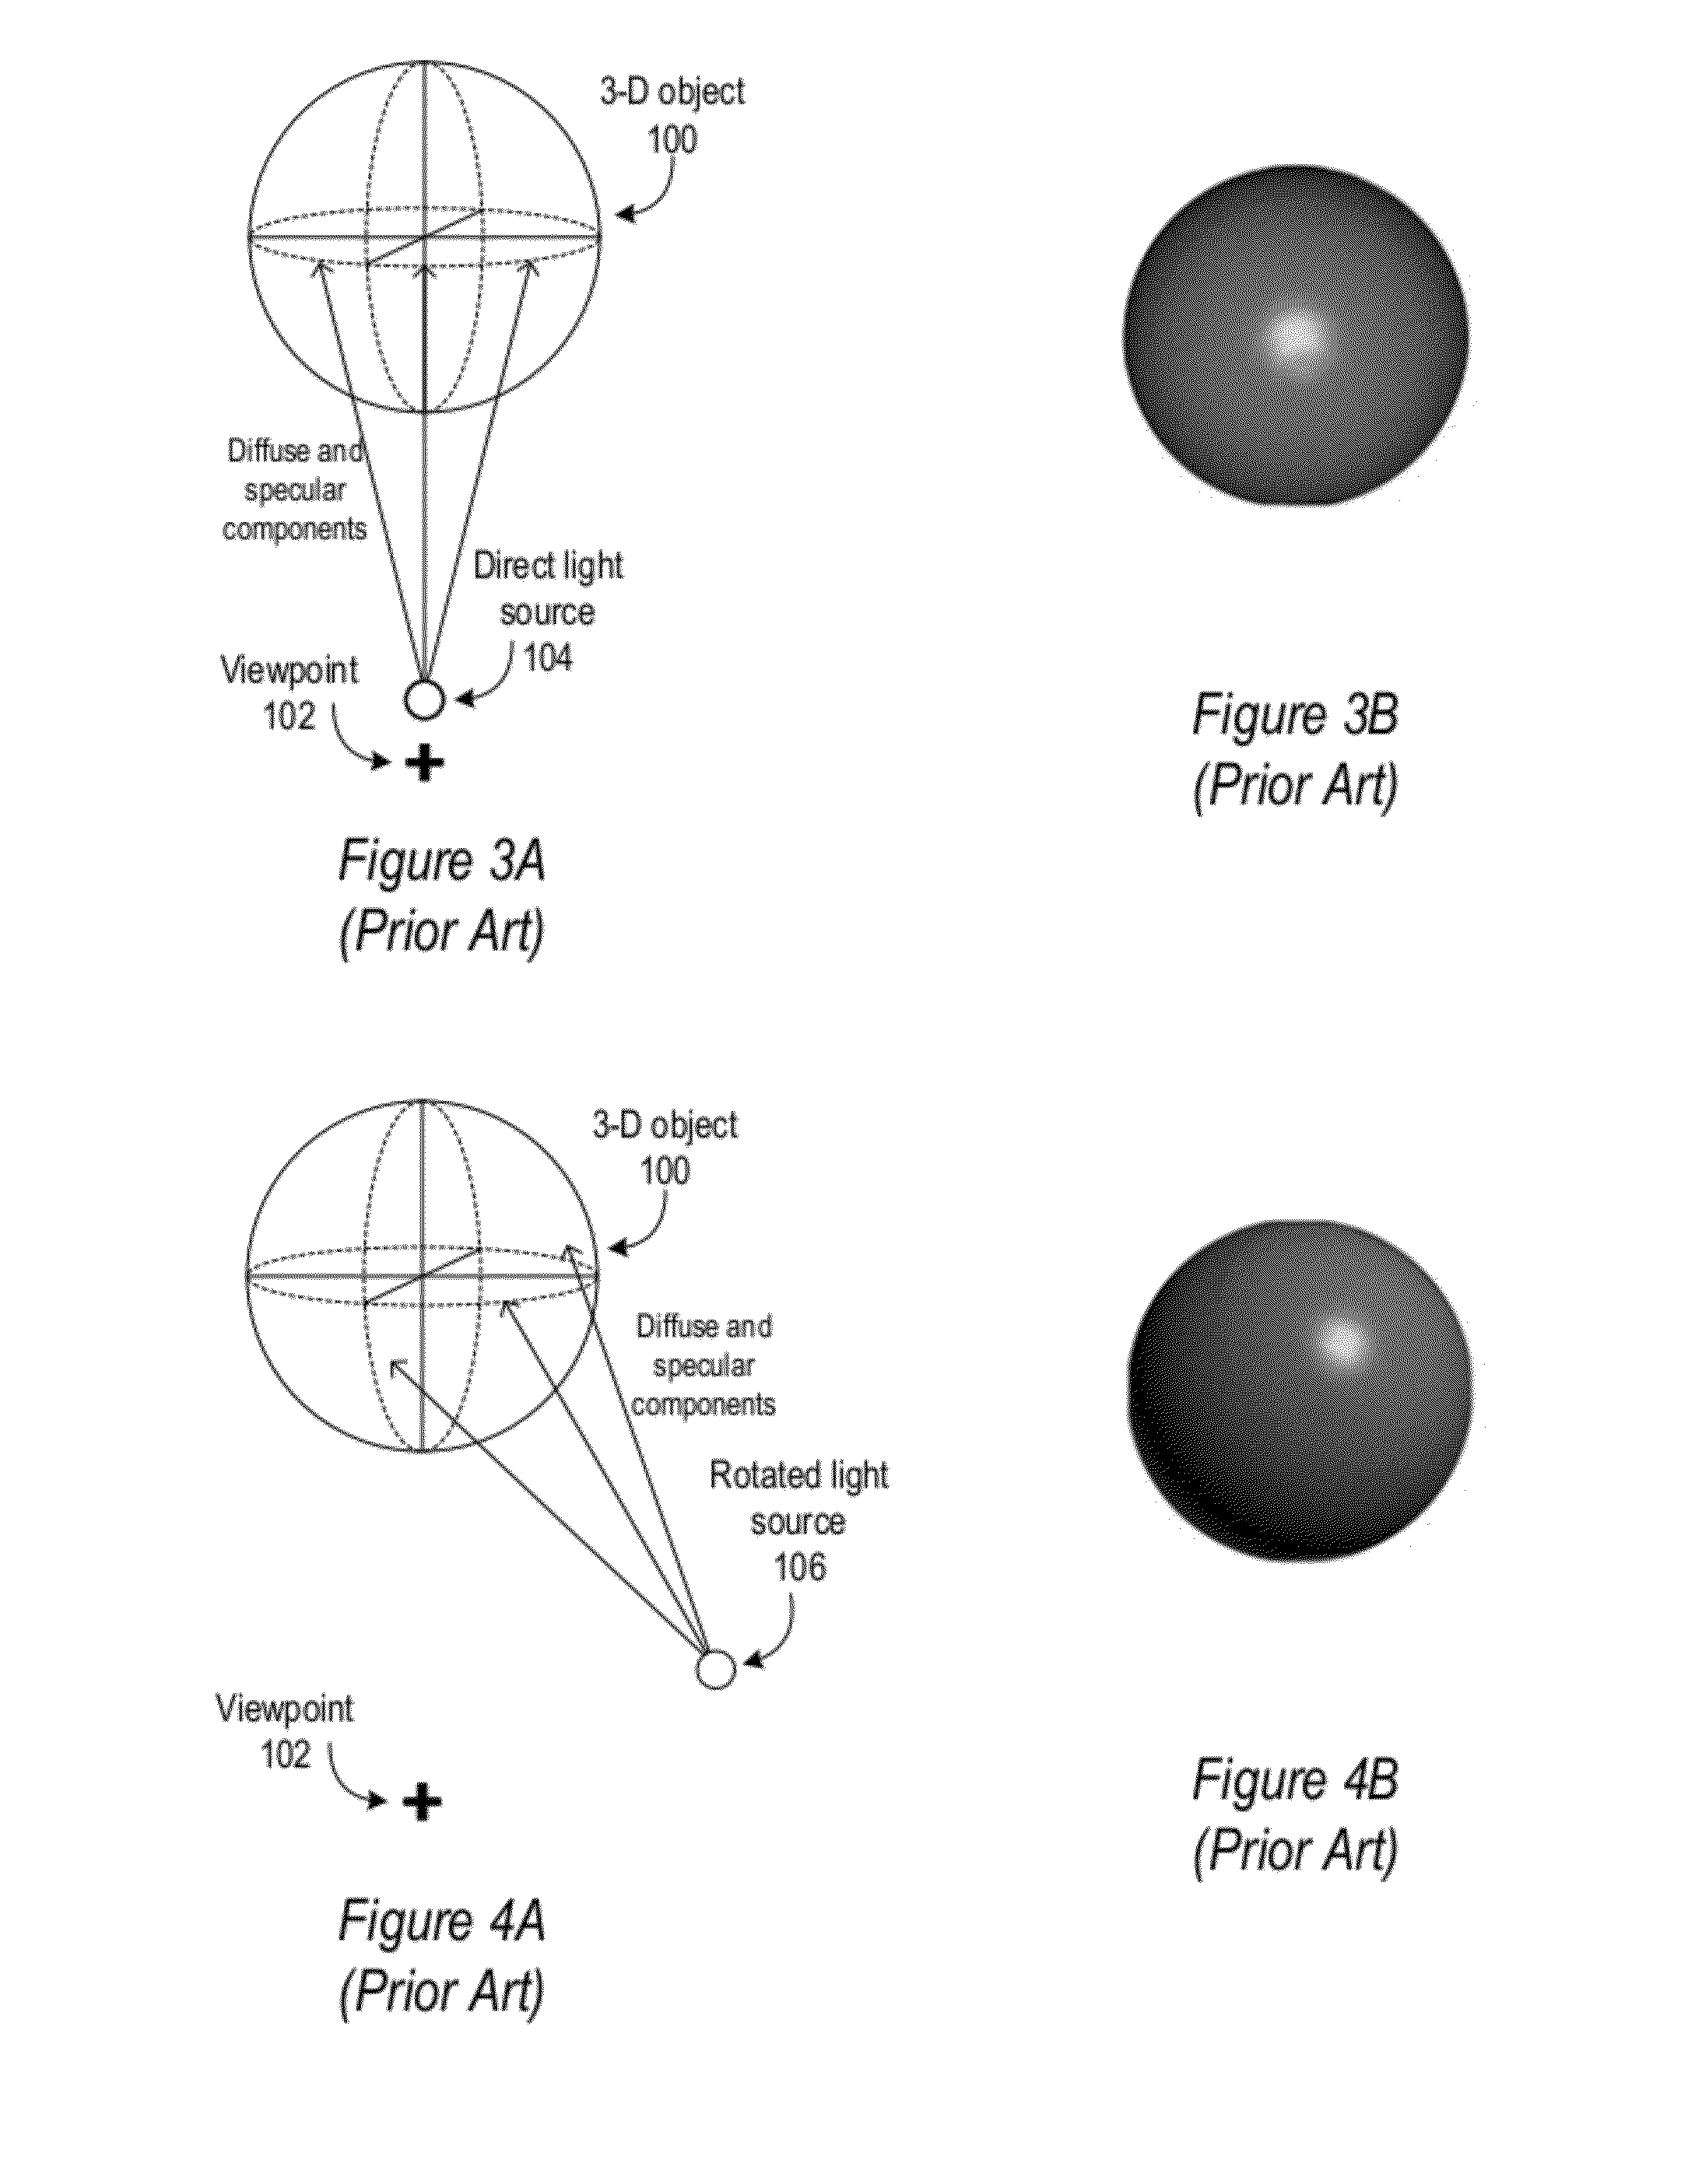 Method and apparatus for illuminating objects in 3-D computer graphics